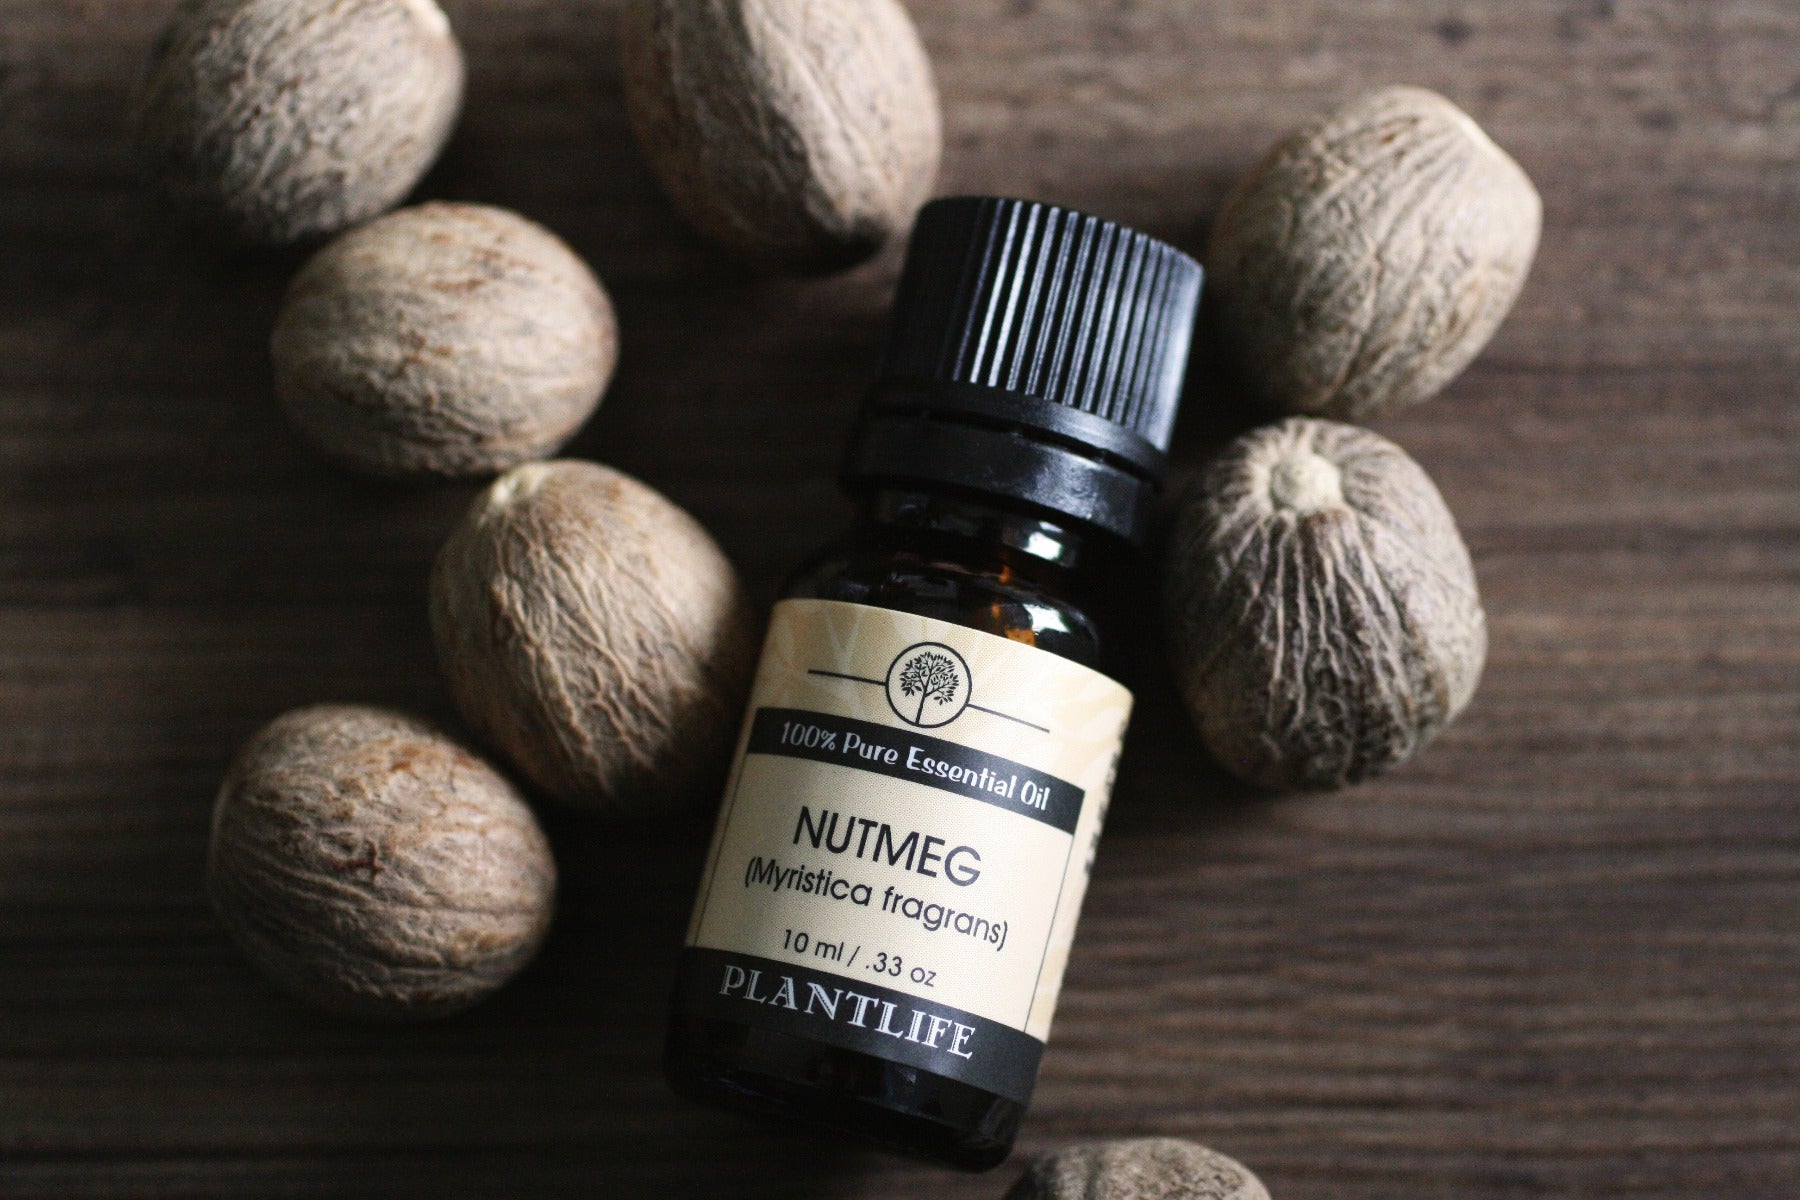 Nutmeg Essential Oil 1 Oz 30ml 100% Natural and Pure for